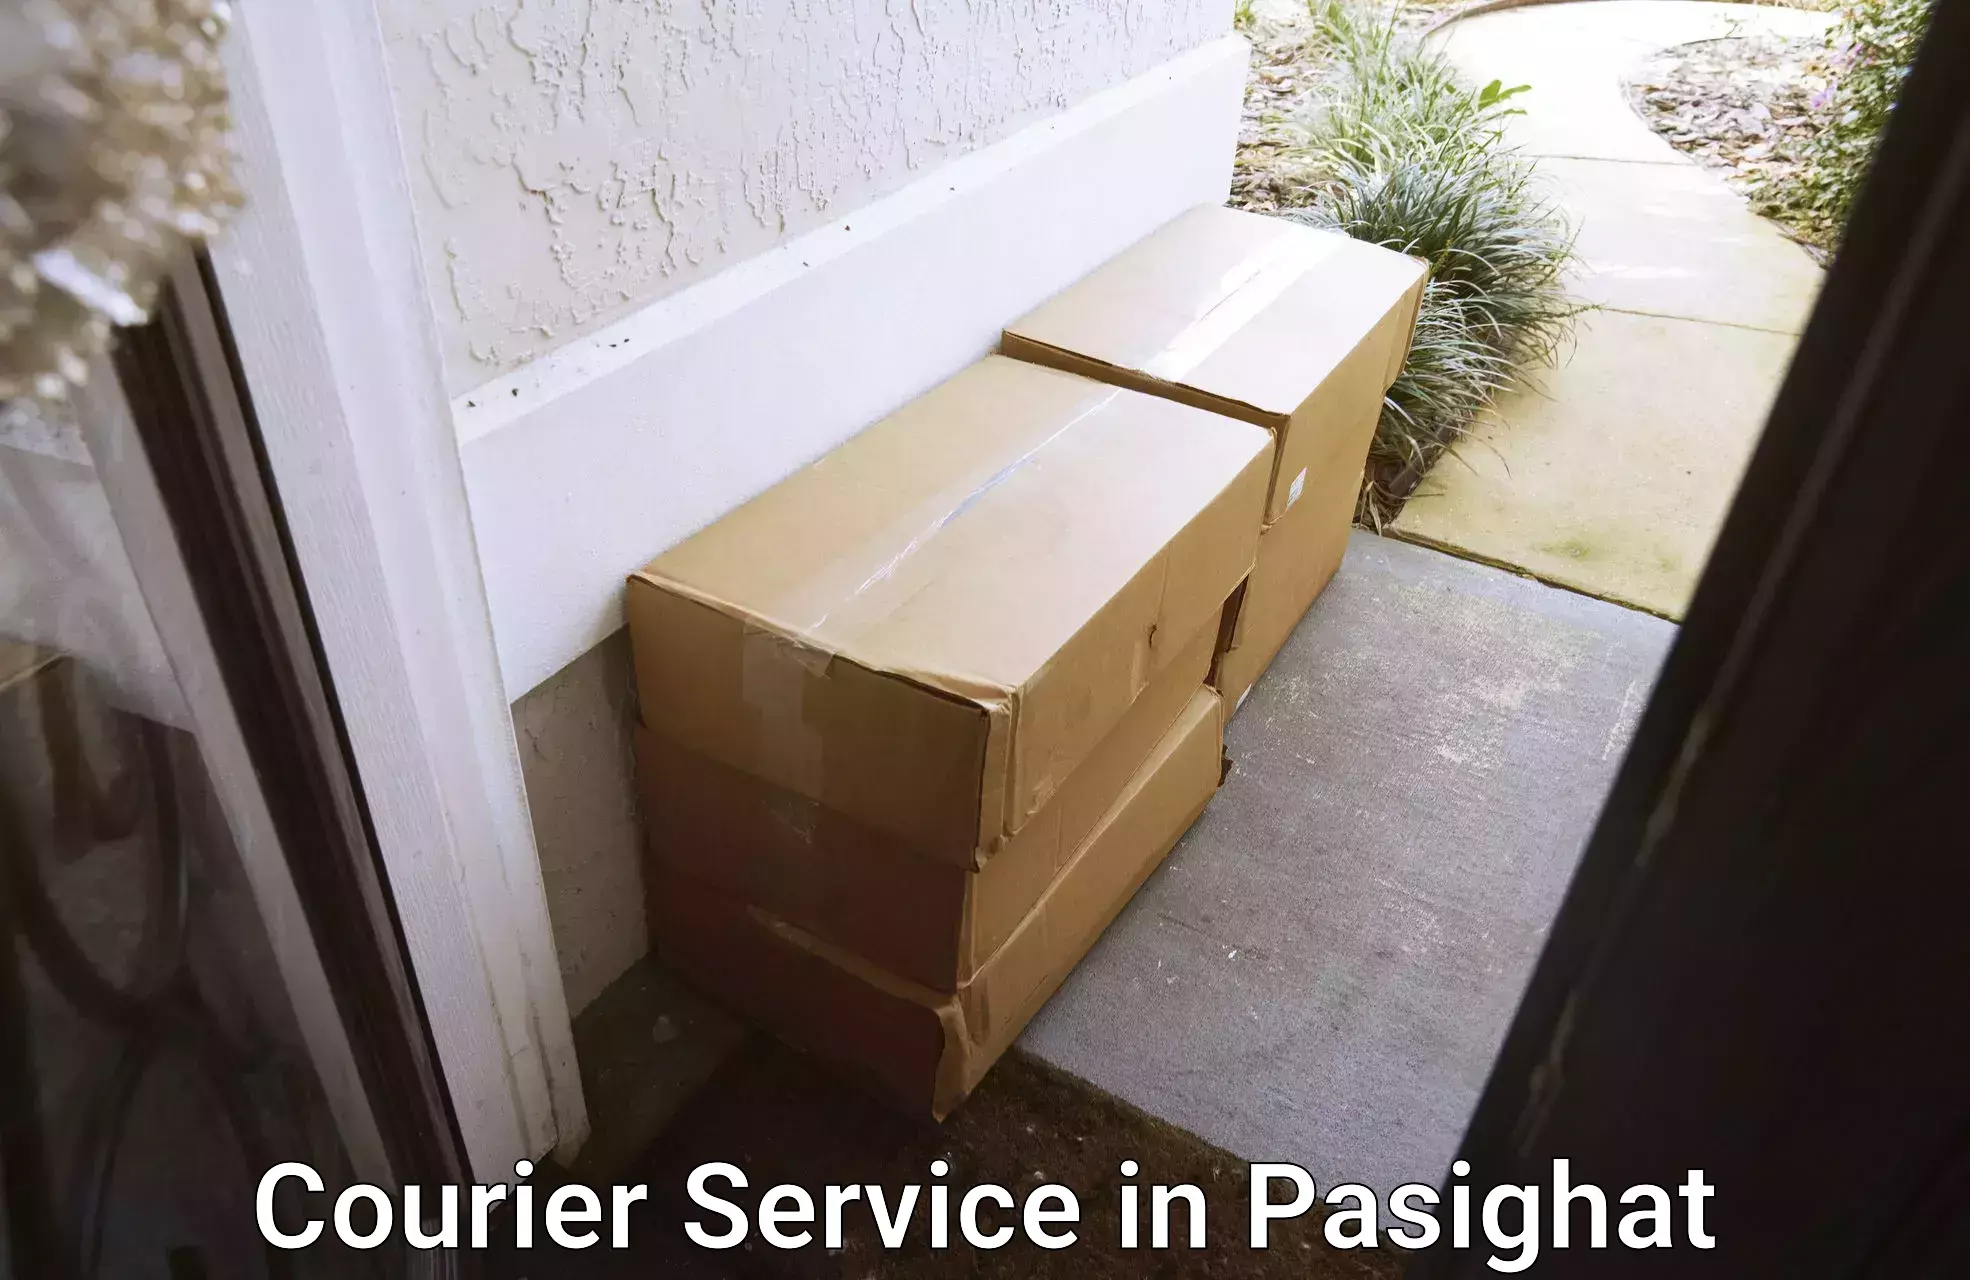 Parcel service for businesses in Pasighat